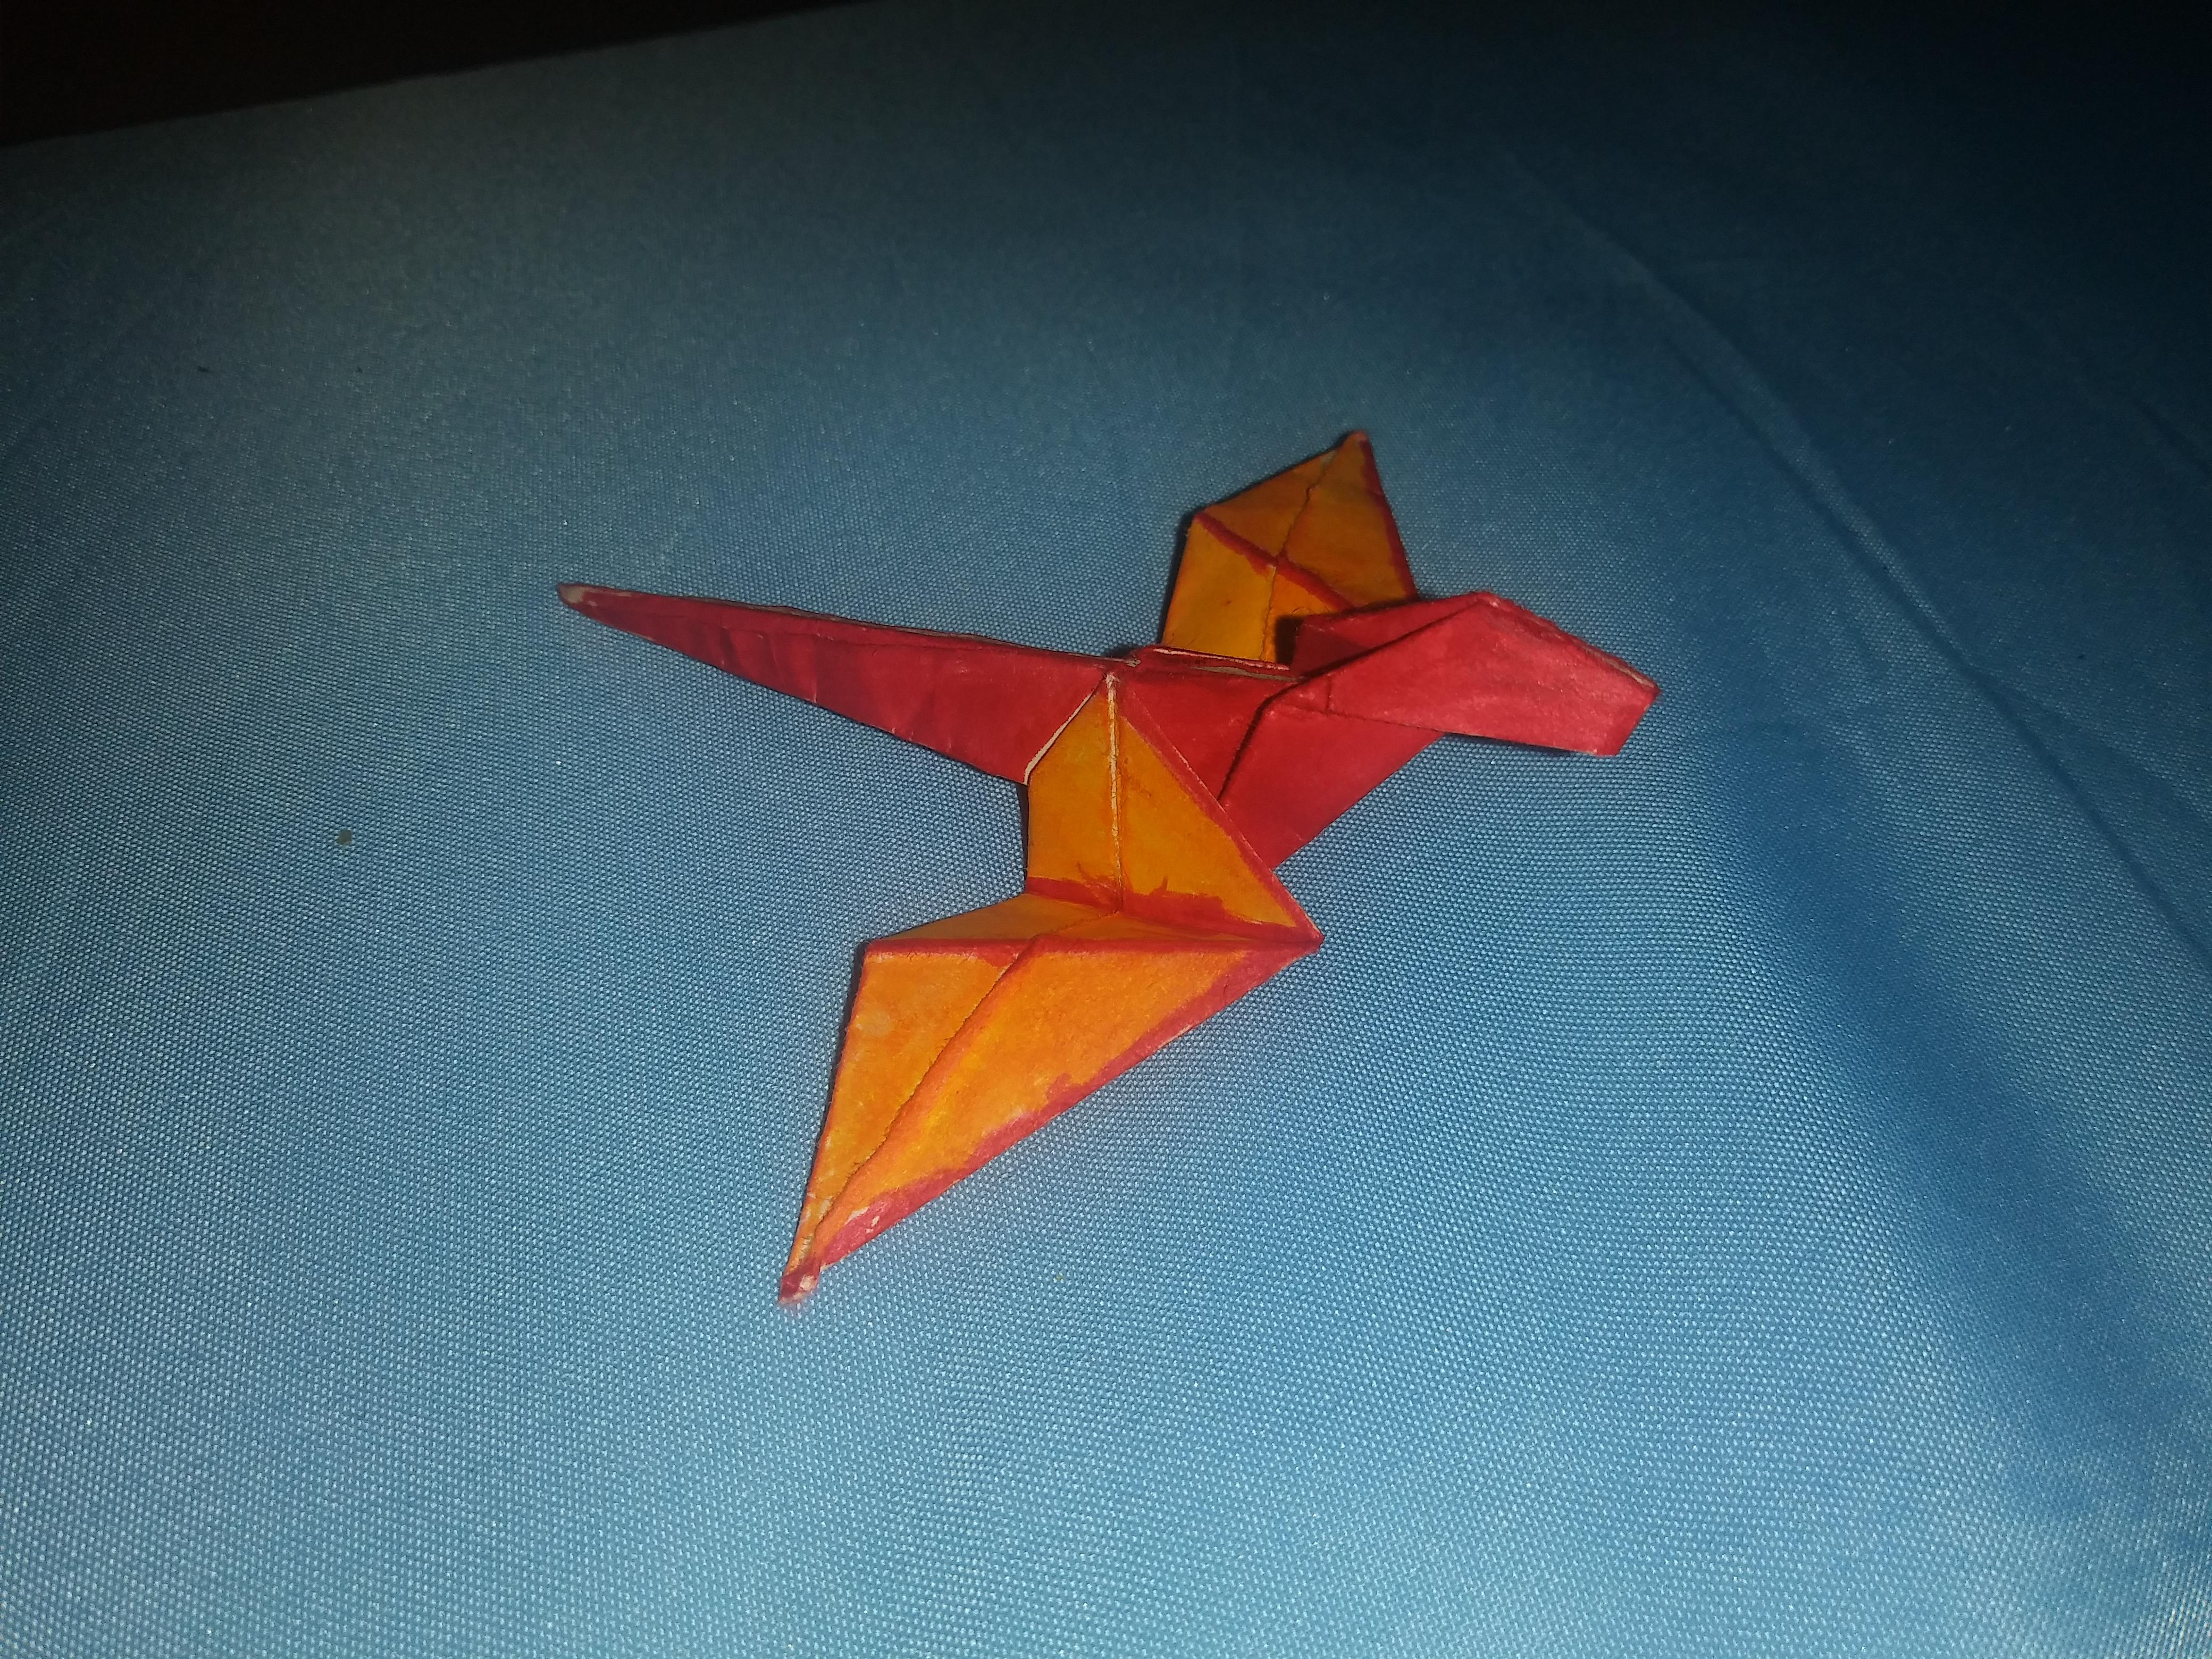 Printer Paper Origami I Made Peril Into Origami Took About 3 Hours Including The Coloring